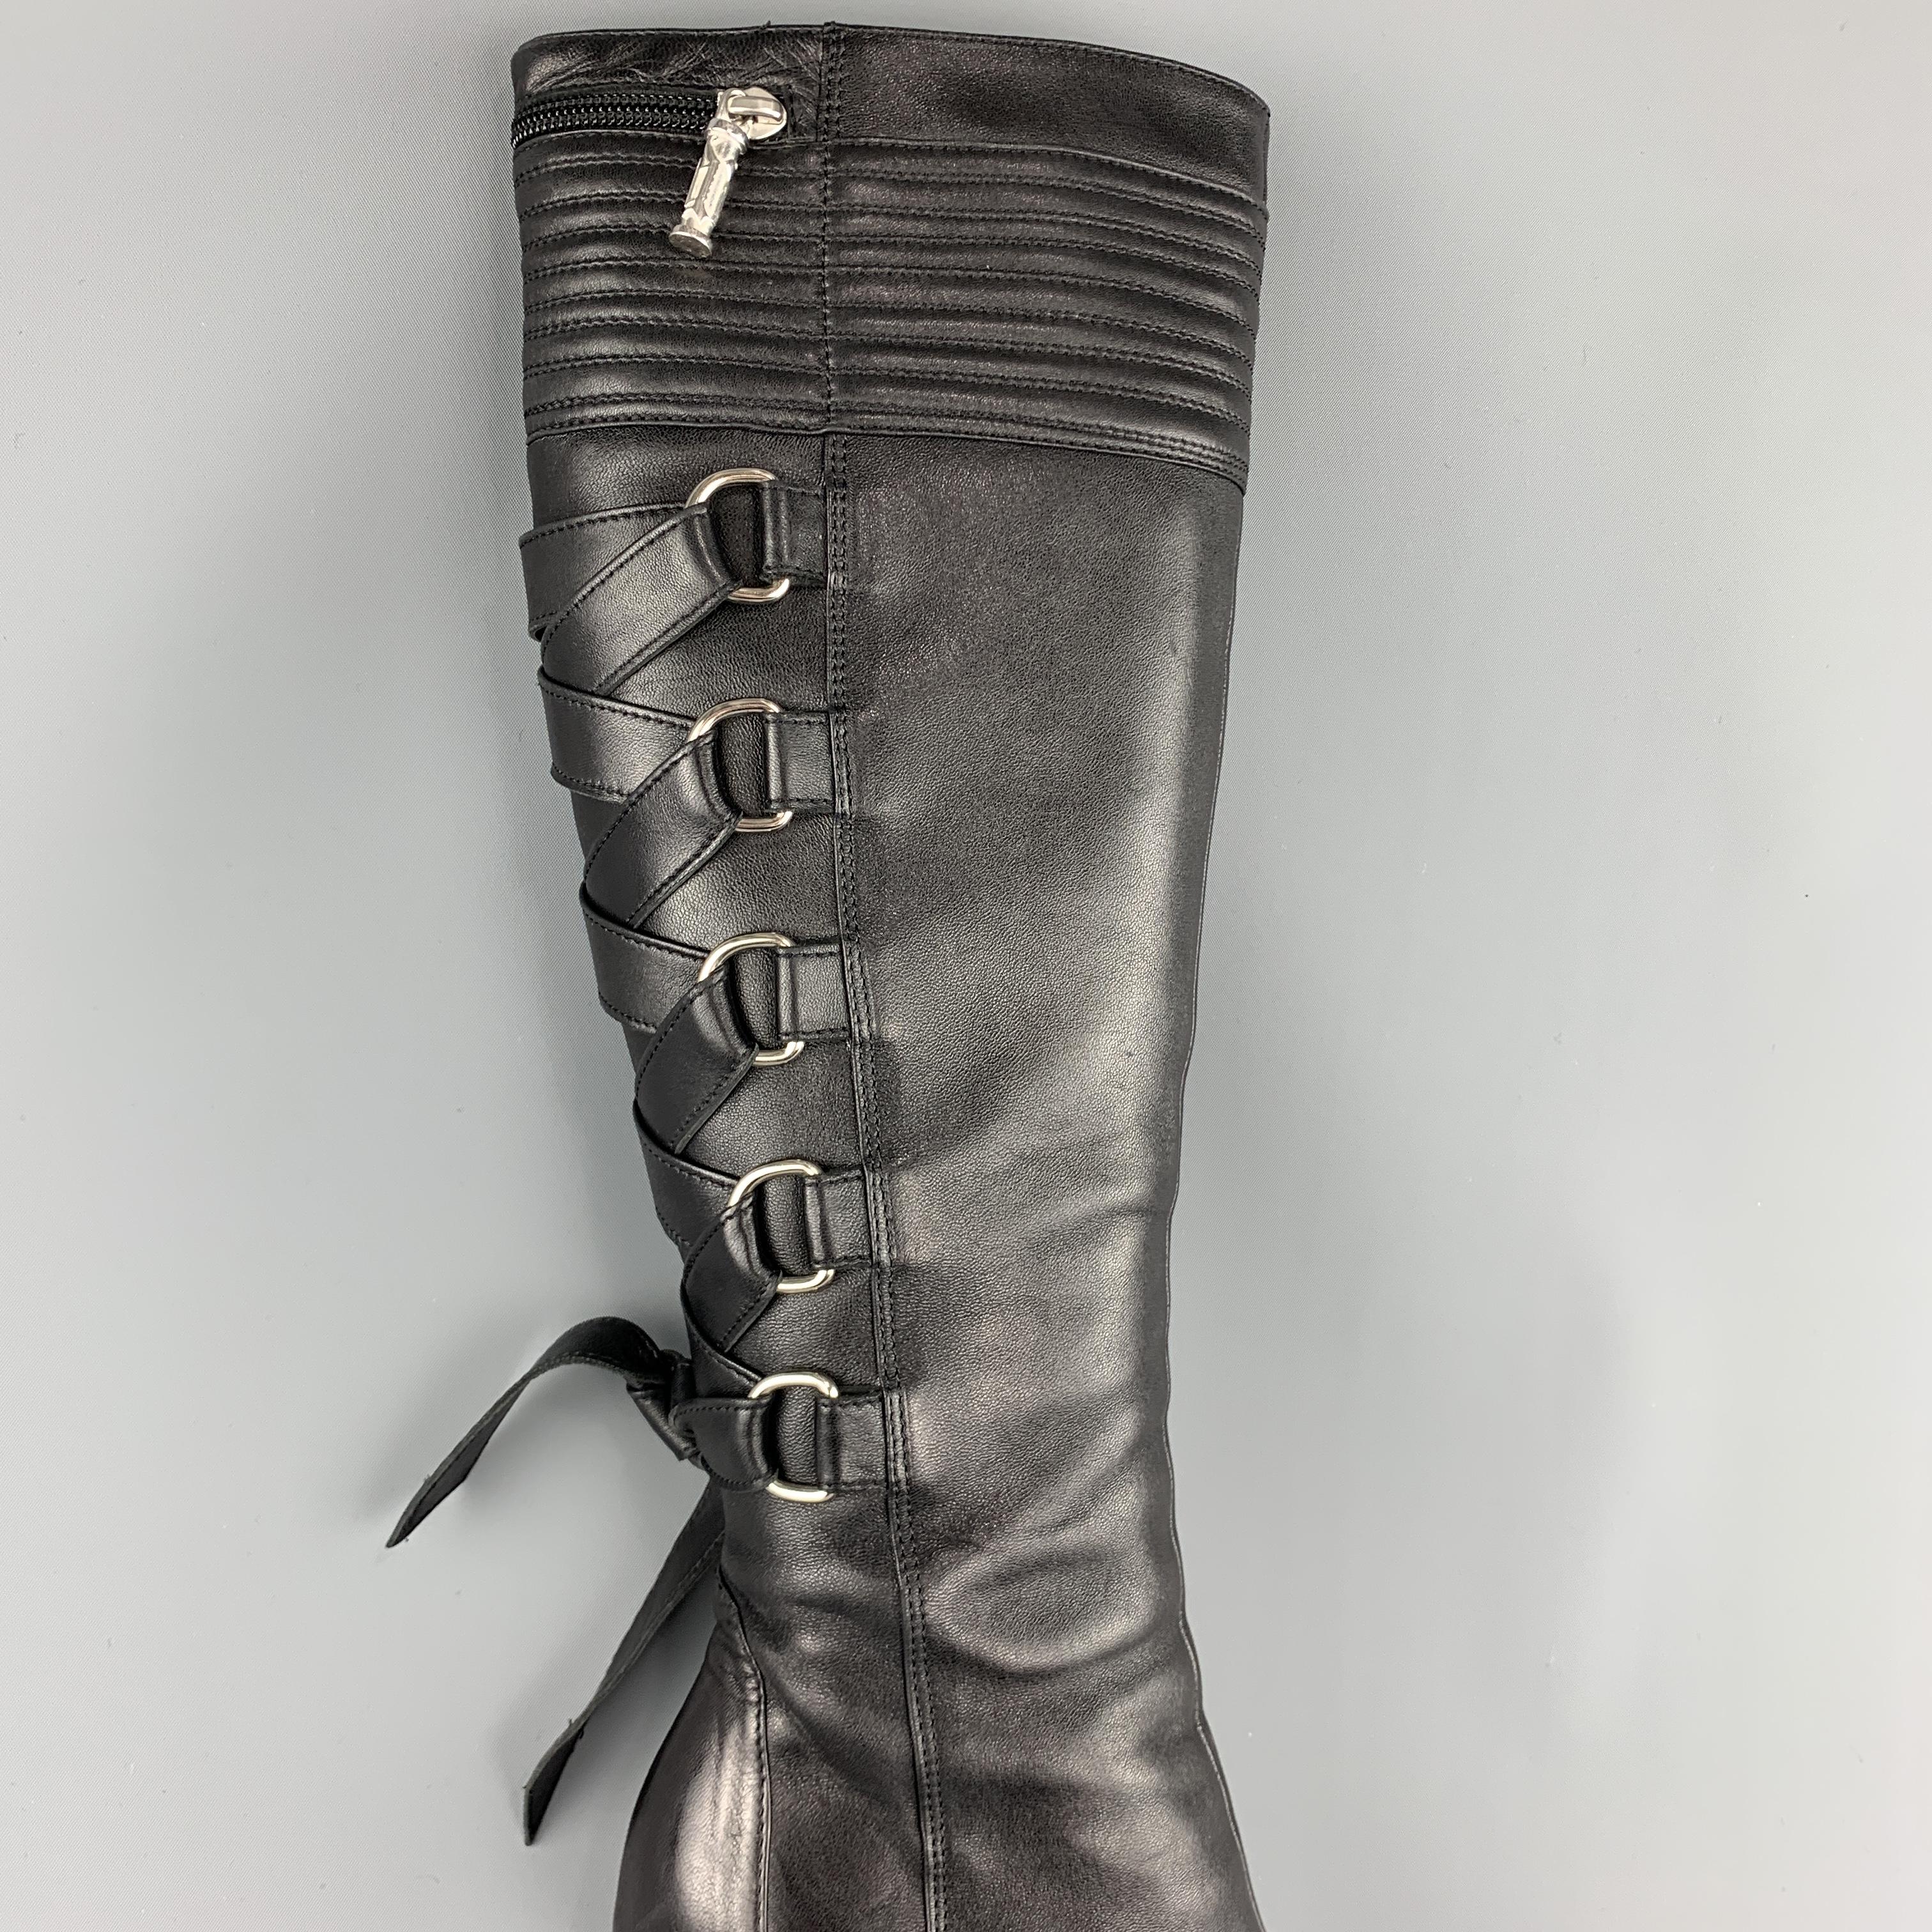 GIANNI VERSACE Knee high bondage boots come in smooth black leather with a quilted top panel, pointed toe, stacked stiletto heel, and iconic Fall 2003 D ring corset lace up back. Made in Italy.
 
Excellent Pre-Owned Condition.
Marked: IT 38
